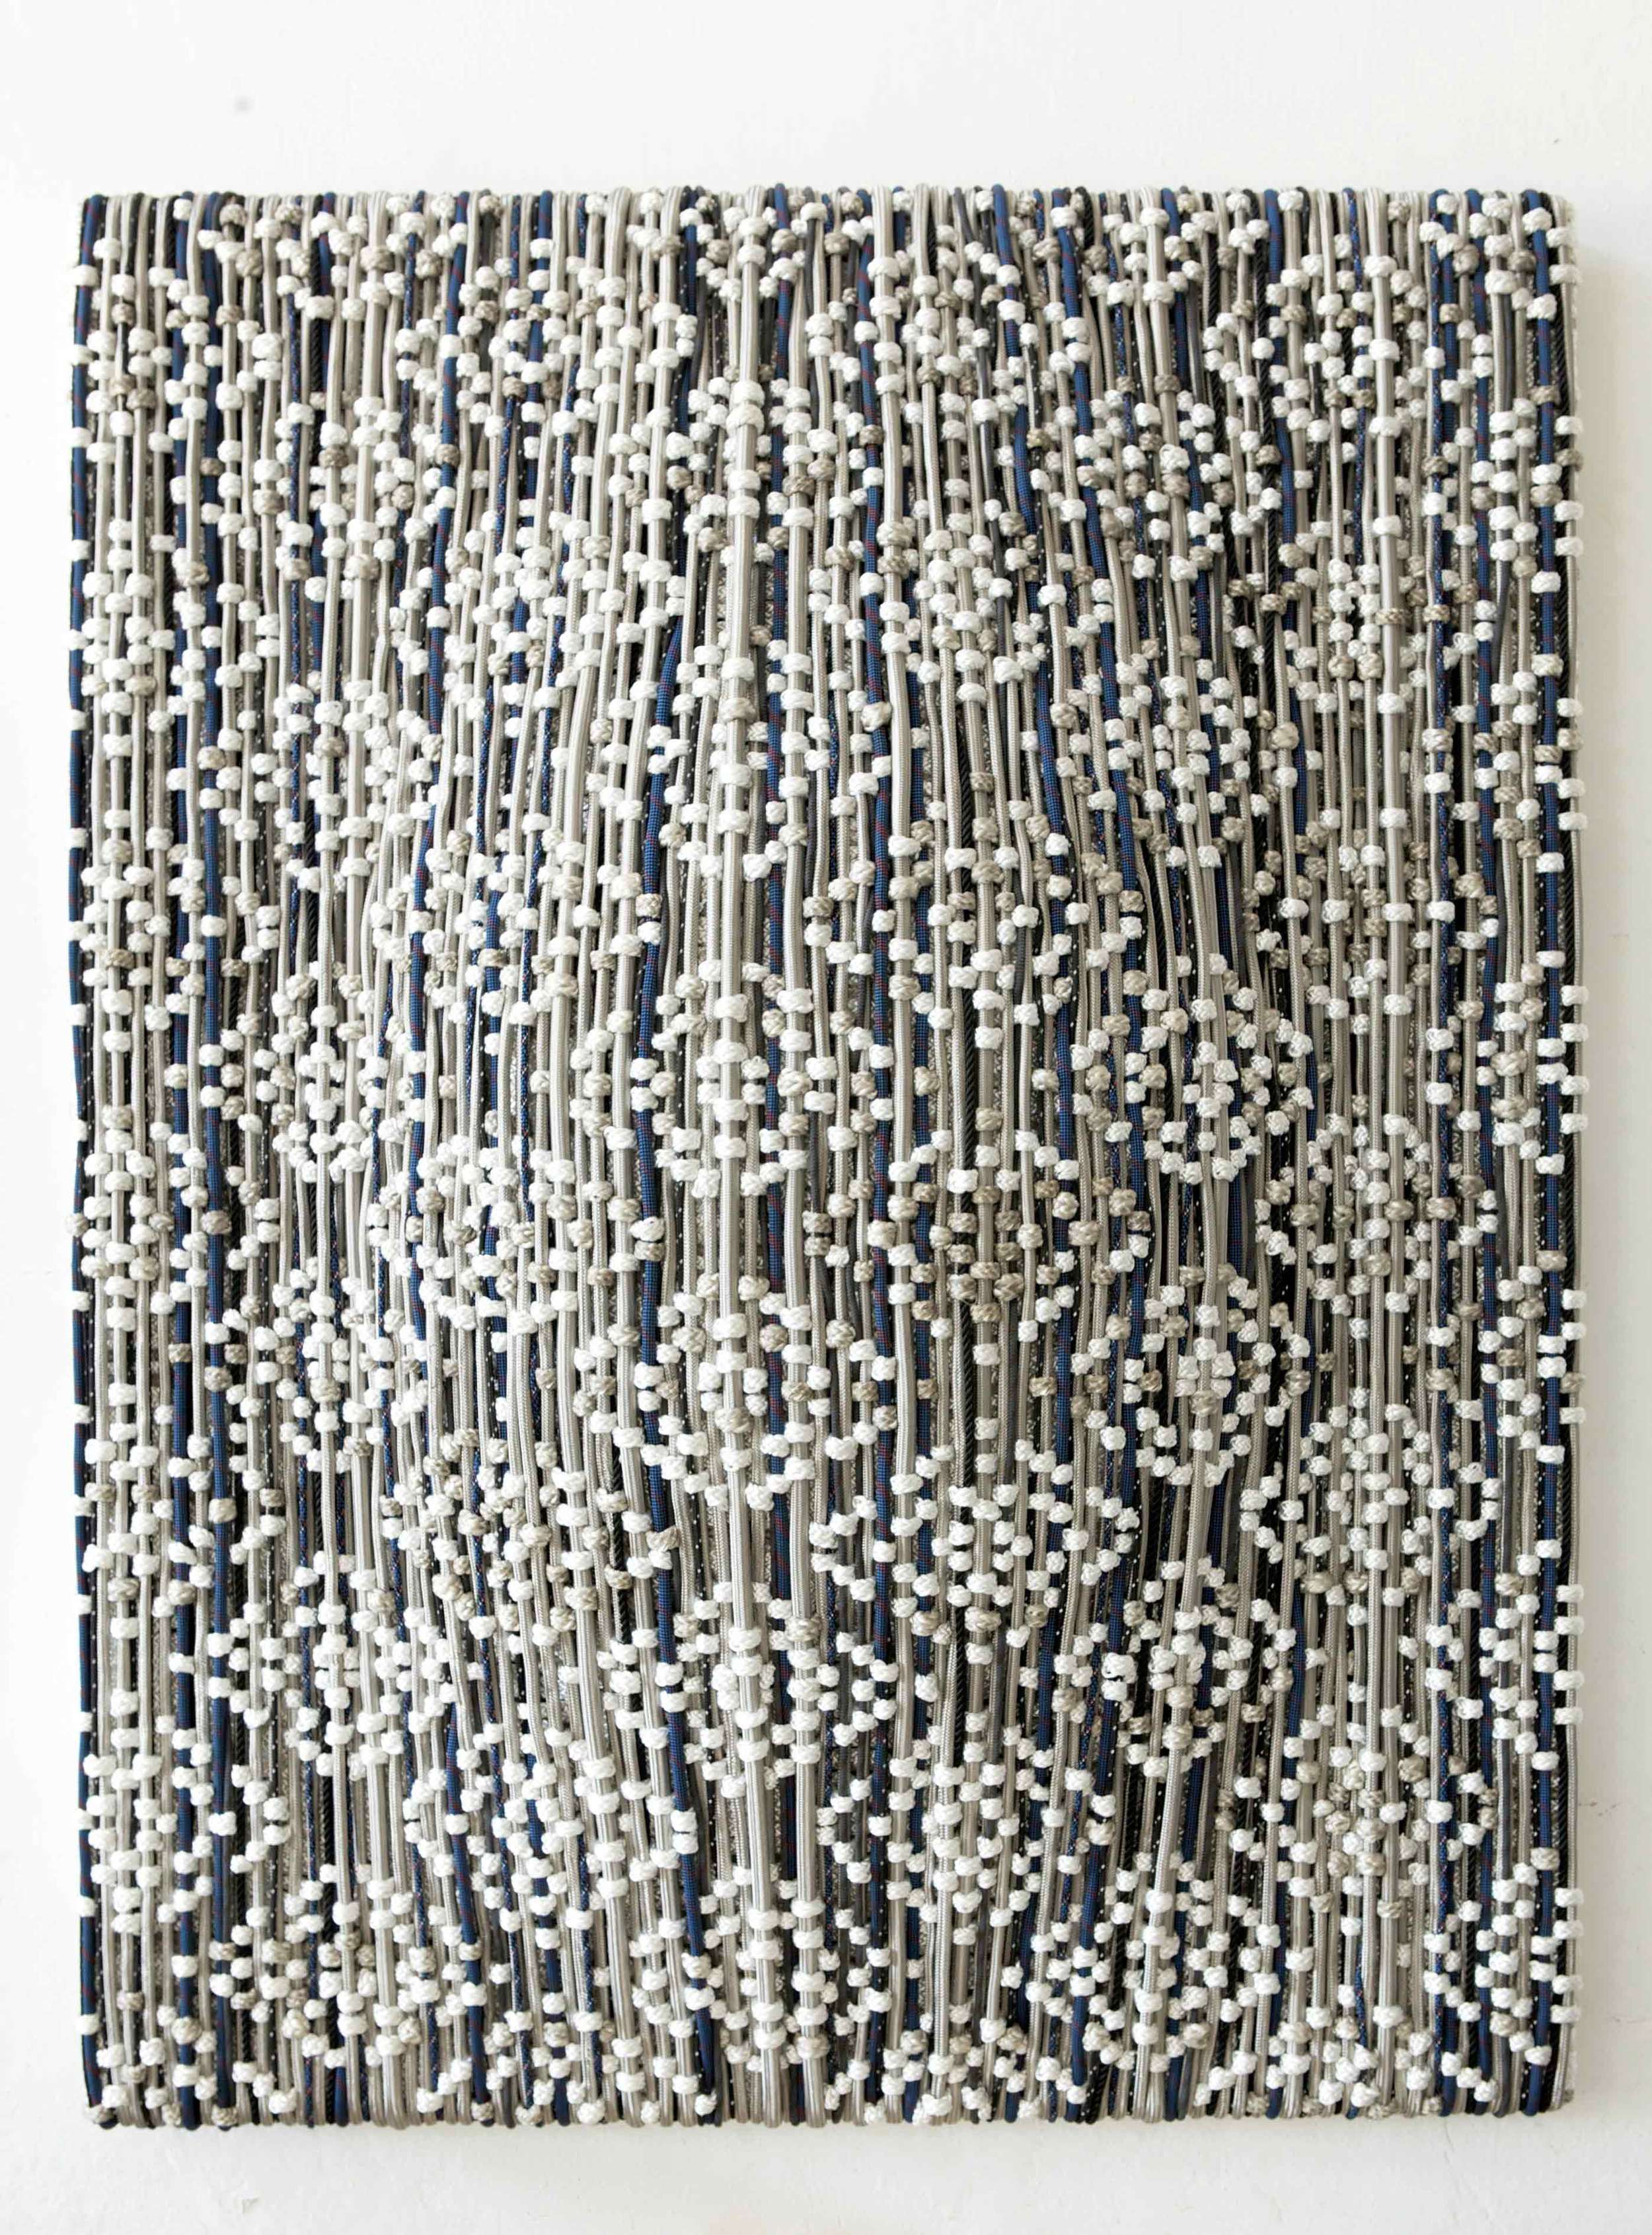   DANI MARTI   Shield – study for a portrait – take 1  2015 Stainless steel braided hose, polyester, nylon, rubber and leather on aluminium frame 180 x 140 x 30cm 